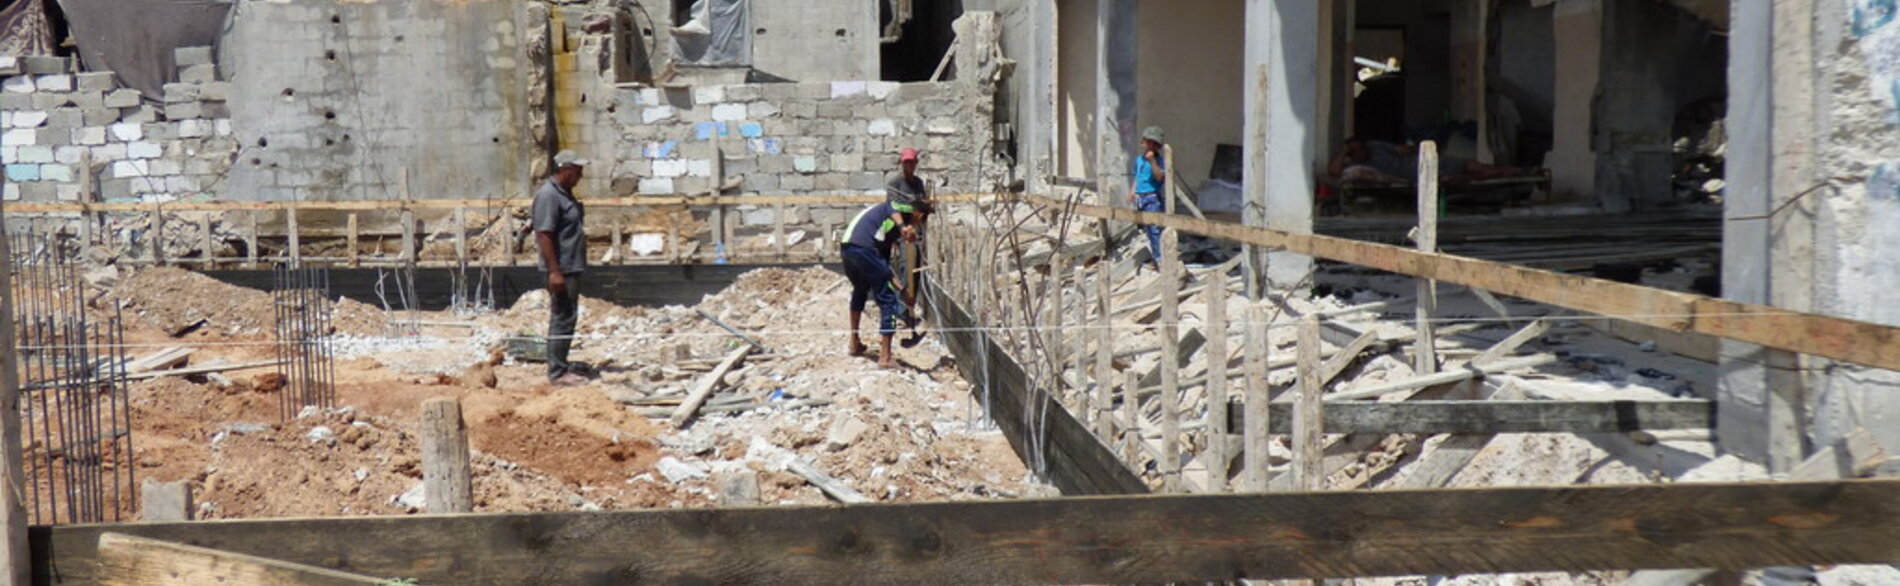 Reconstruction begins in the devastated area in Ash Shuja’iyeh of Gaza. Photo by OCHA